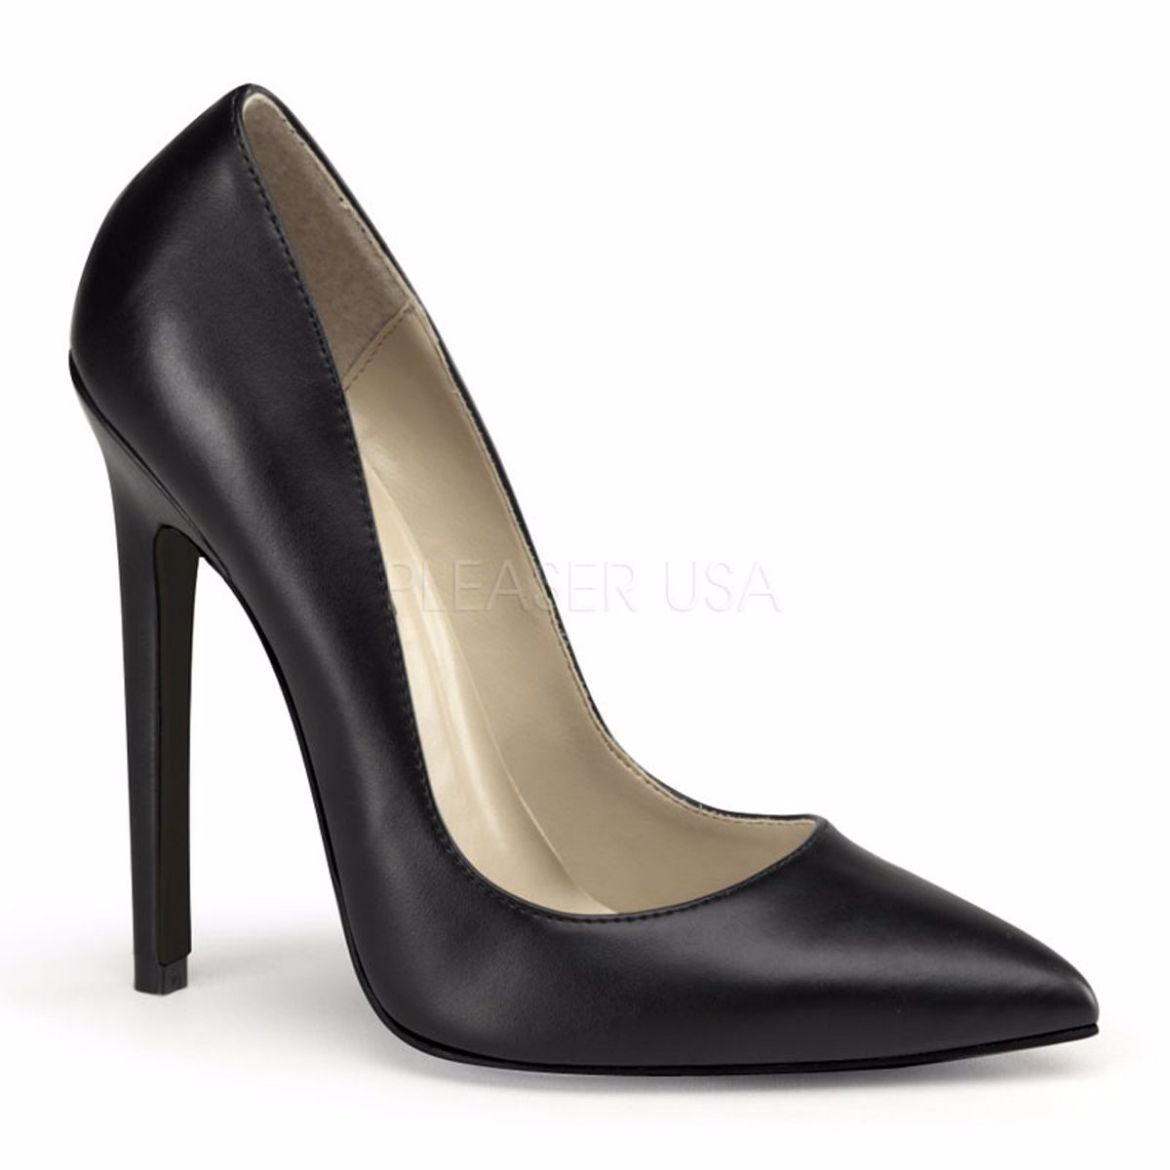 Product image of Pleaser Sexy-20 Black Faux Leather, 5 inch (12.7 cm) Heel Court Pump Shoes